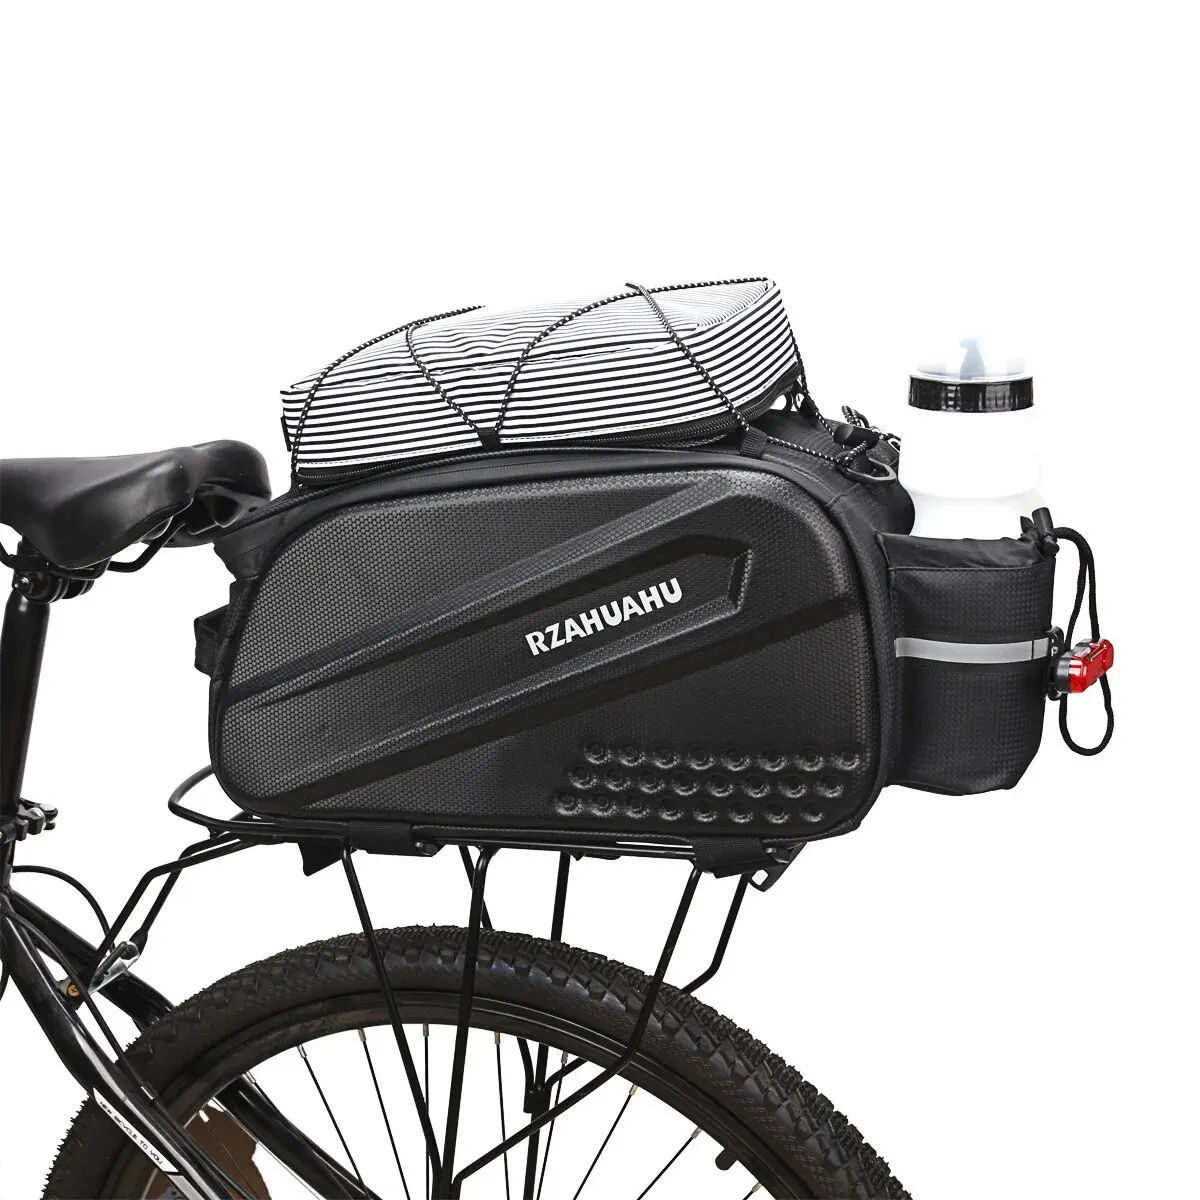 Introducing our Bicycle Camel Bag: Large Capacity Electric Foldable Rear Seat Bag for Mountain Bikes! - Bicycle bag - 1